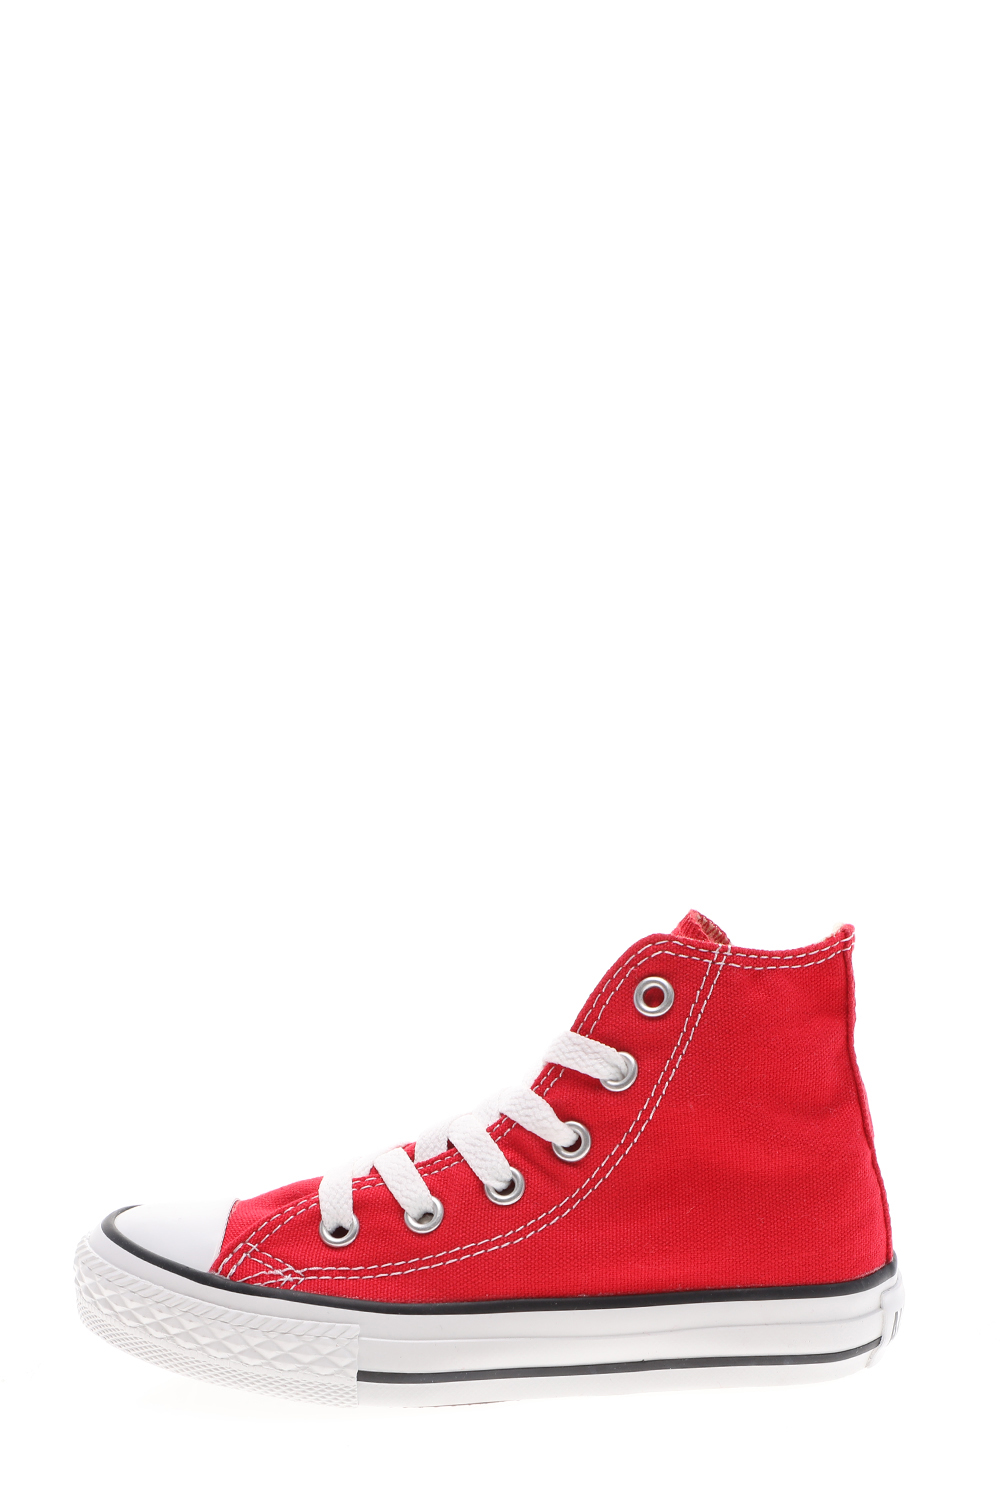 CONVERSE - Παιδικά sneakers Chuck Taylor AS Core HI κόκκινα Παιδικά/Girls/Παπούτσια/Sneakers